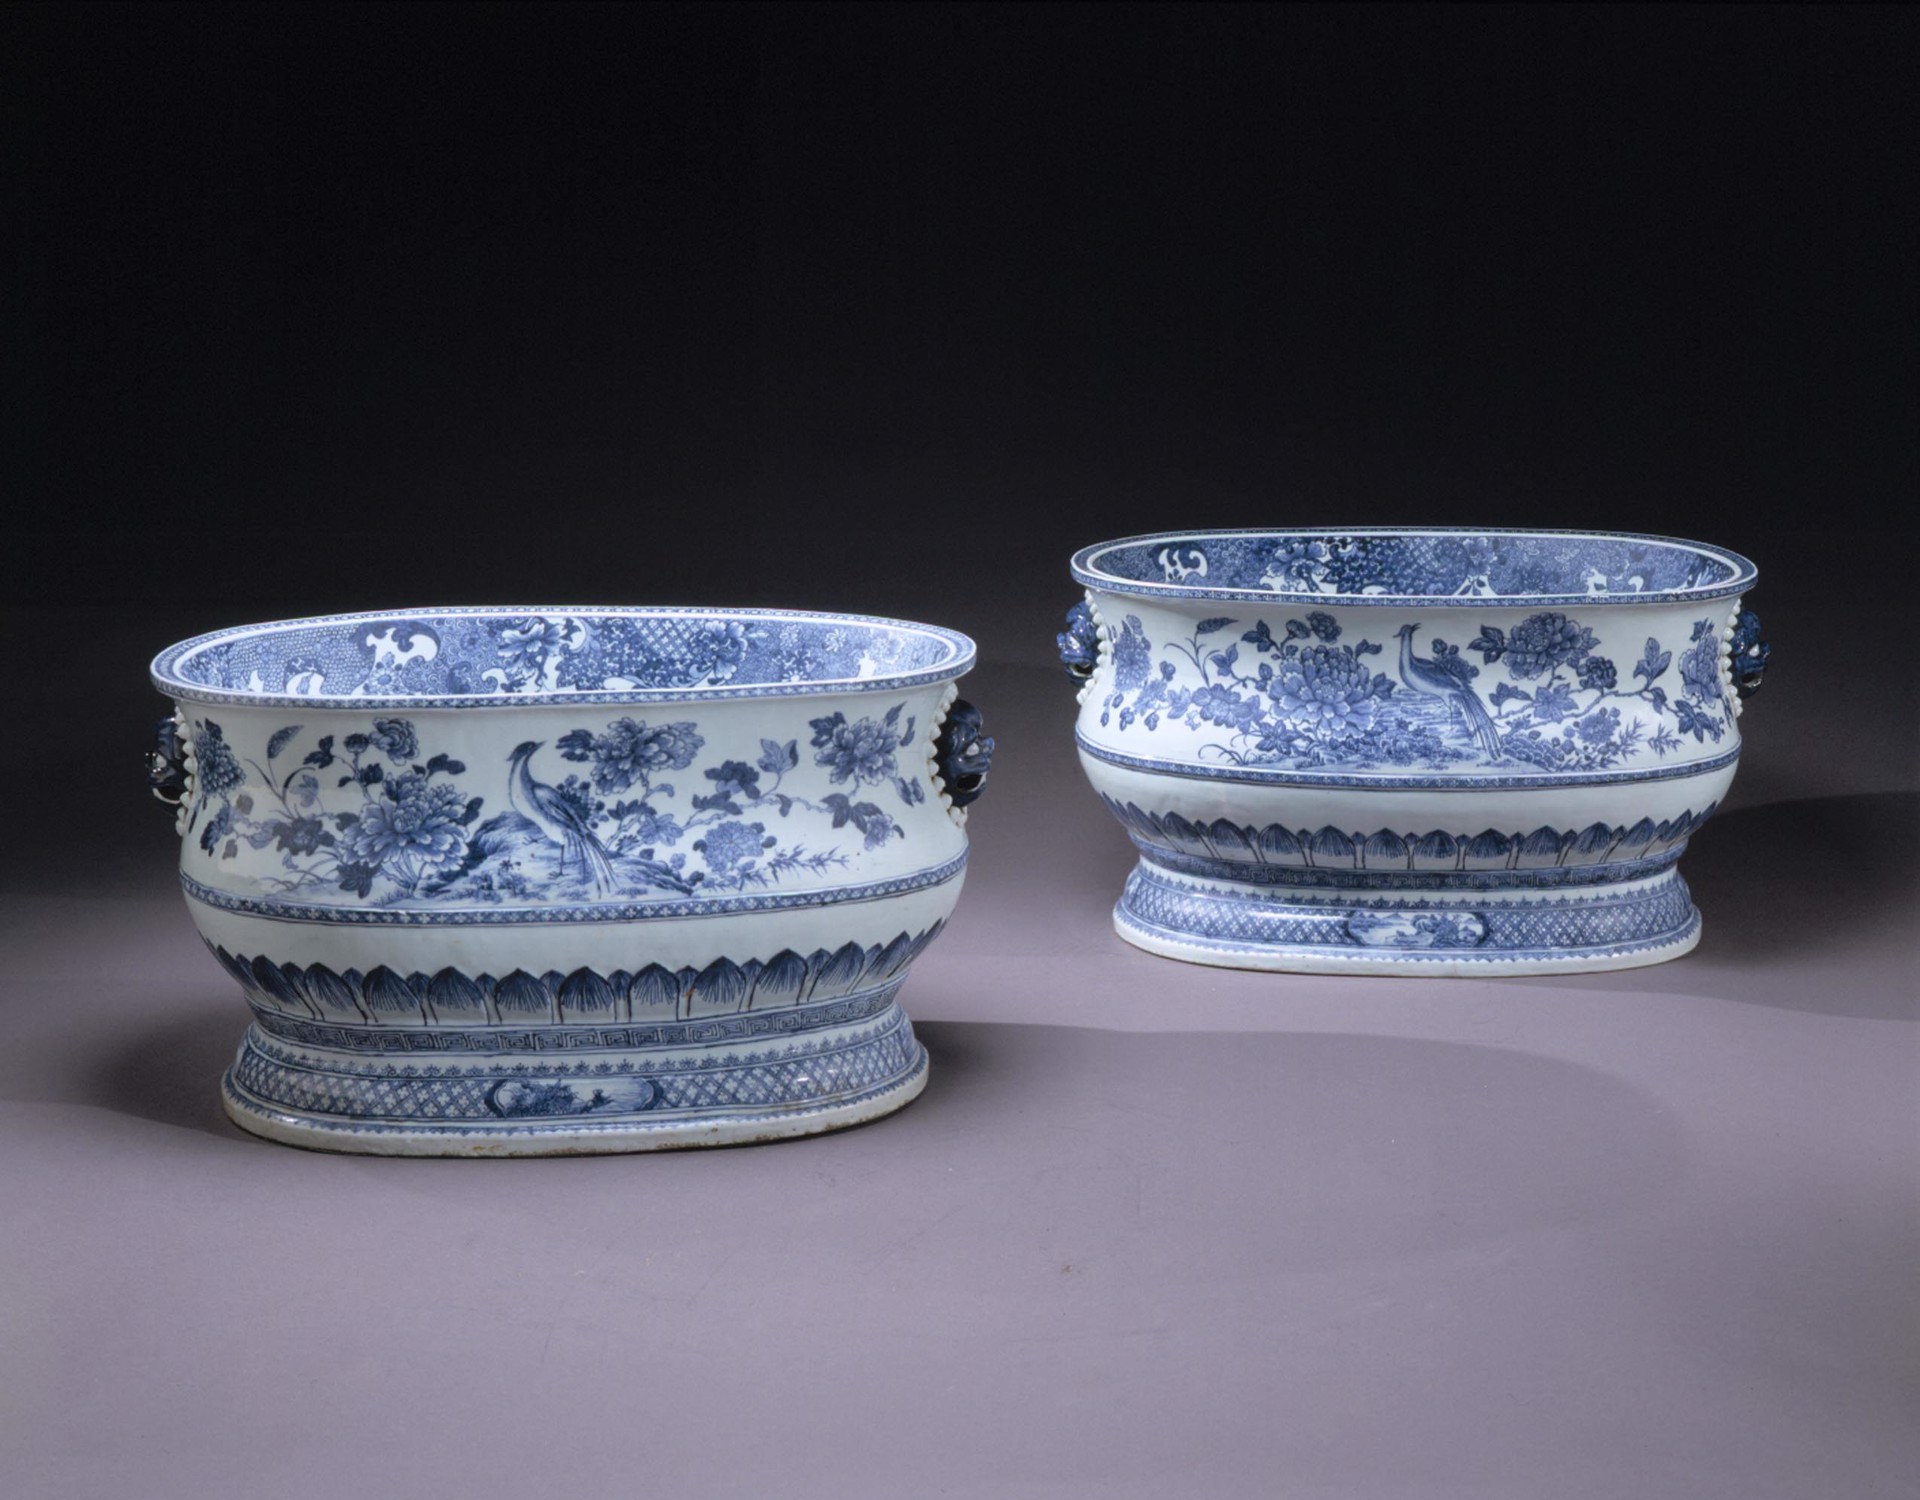 PAIR OF LARGE BLUE AND WHITE CISTERNS